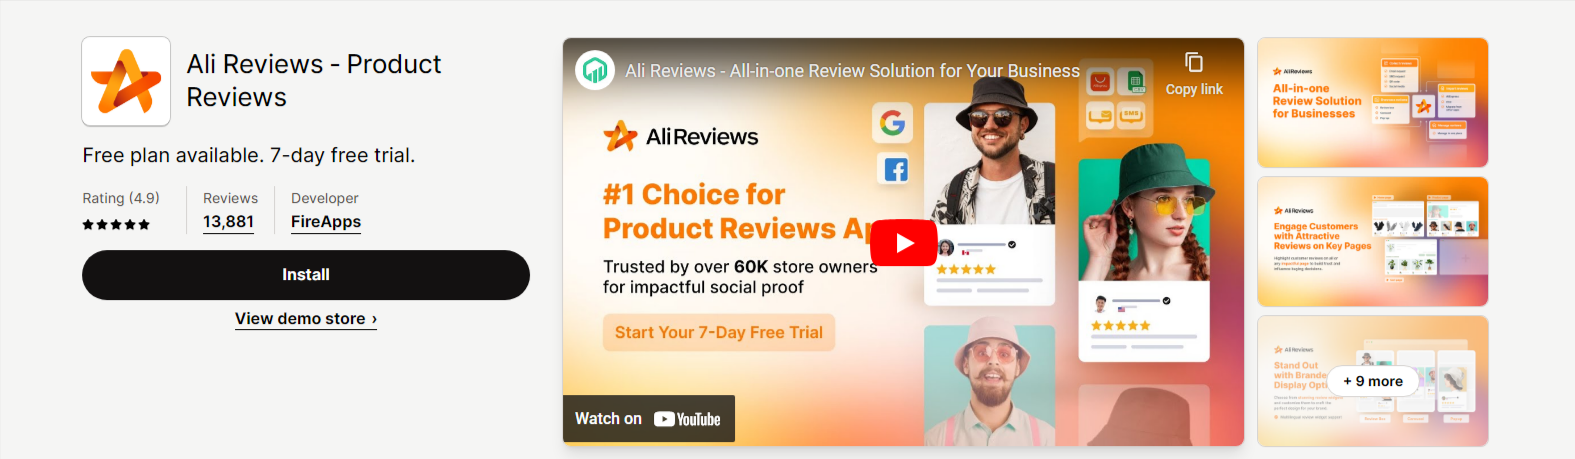 Best Free Dropshipping Apps for Shopify:"Ali Reviews ‑ Product Reviews